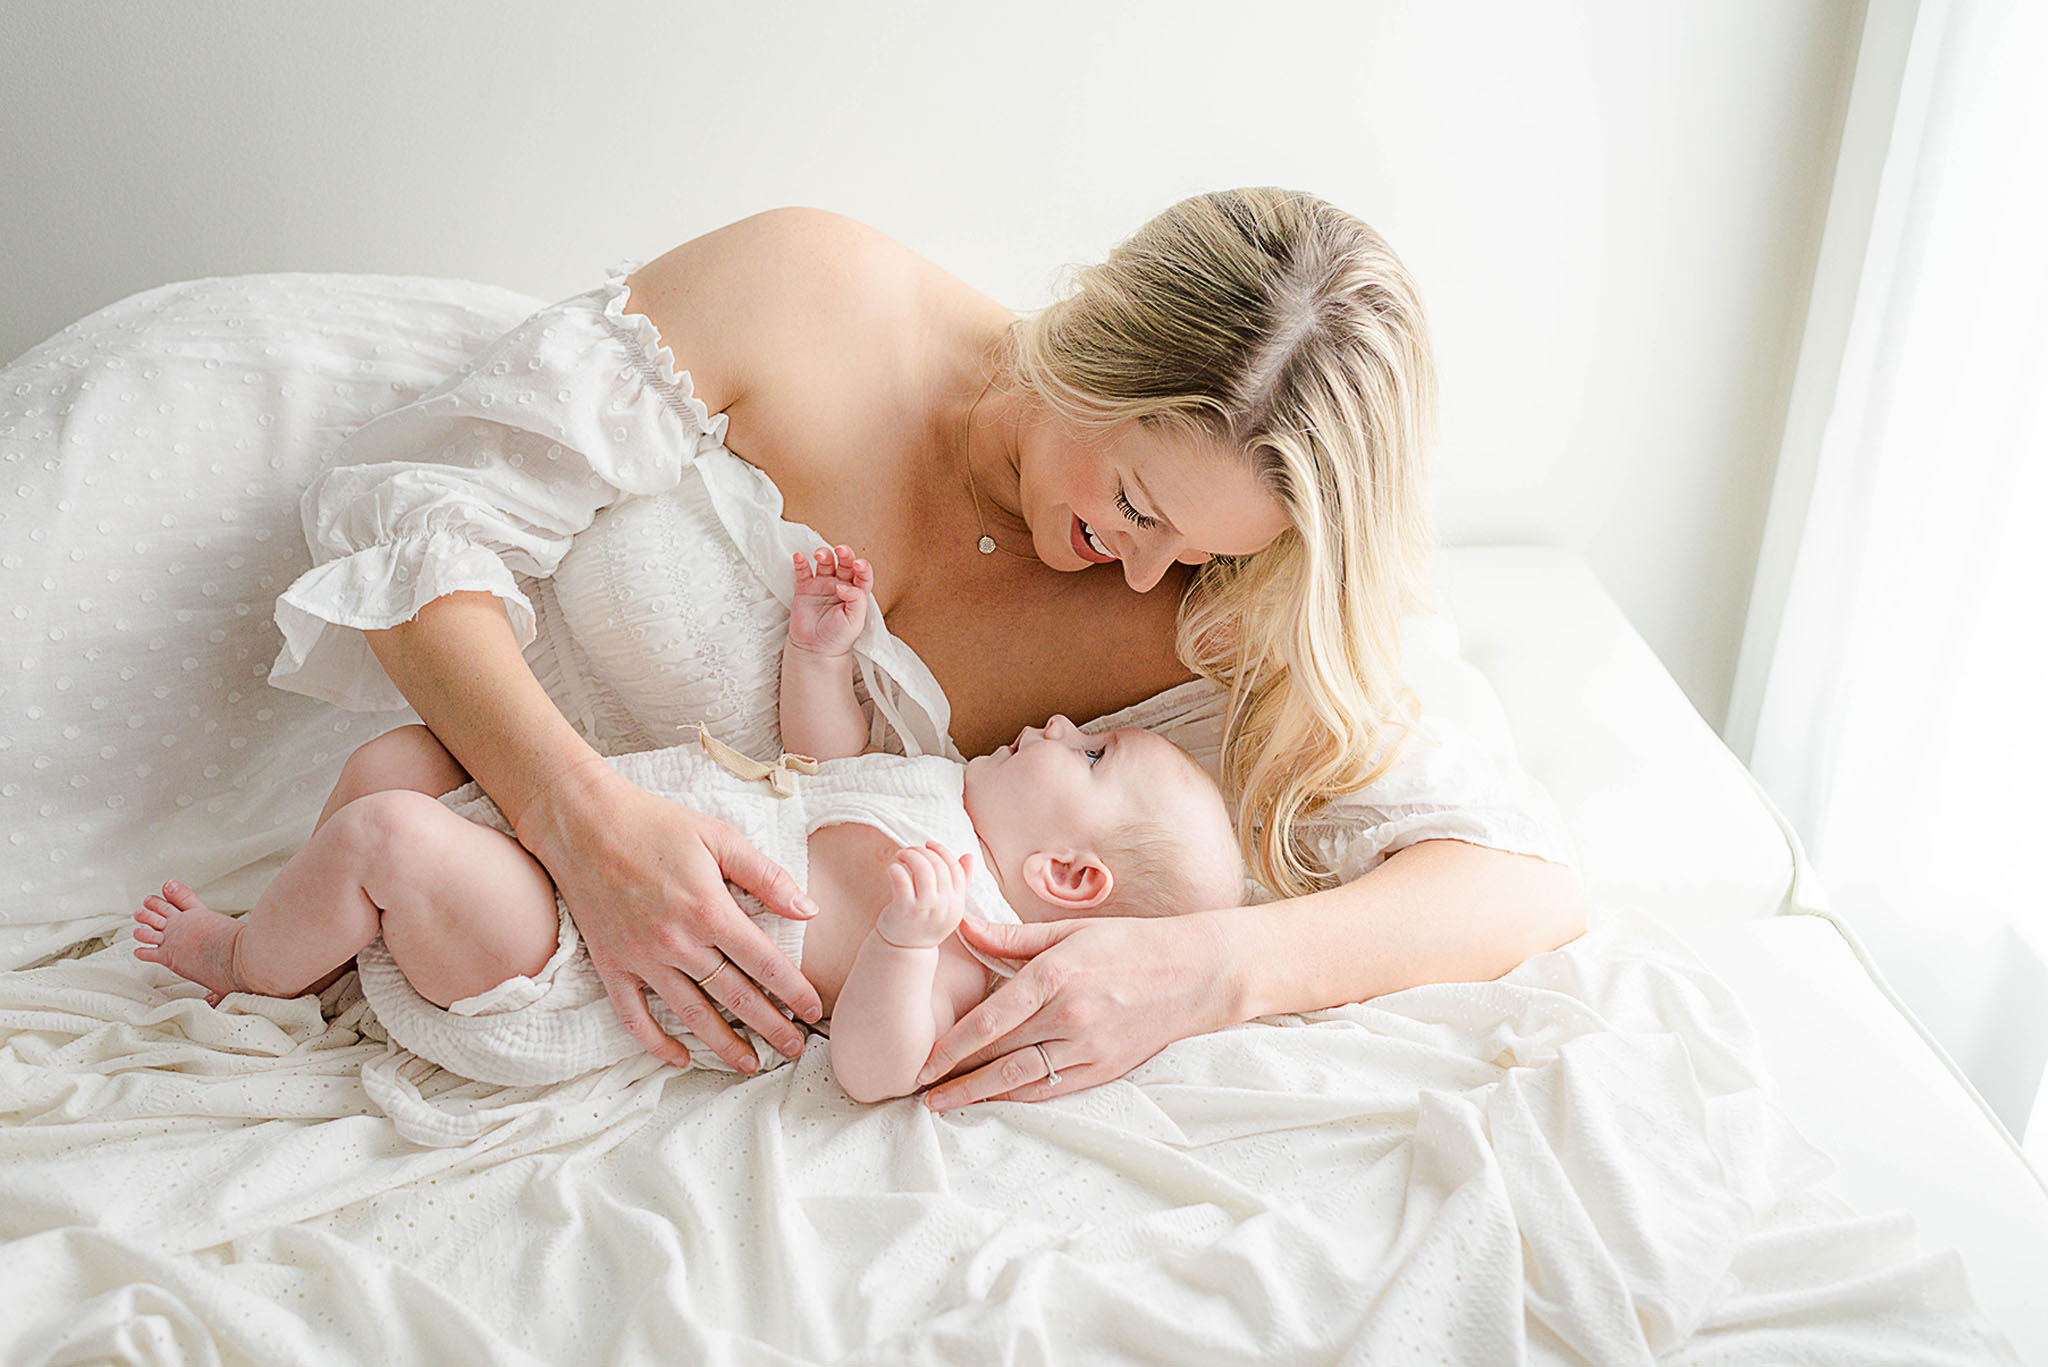 A mom in a white dress lays on a bed cuddling her infant baby in a white onesie